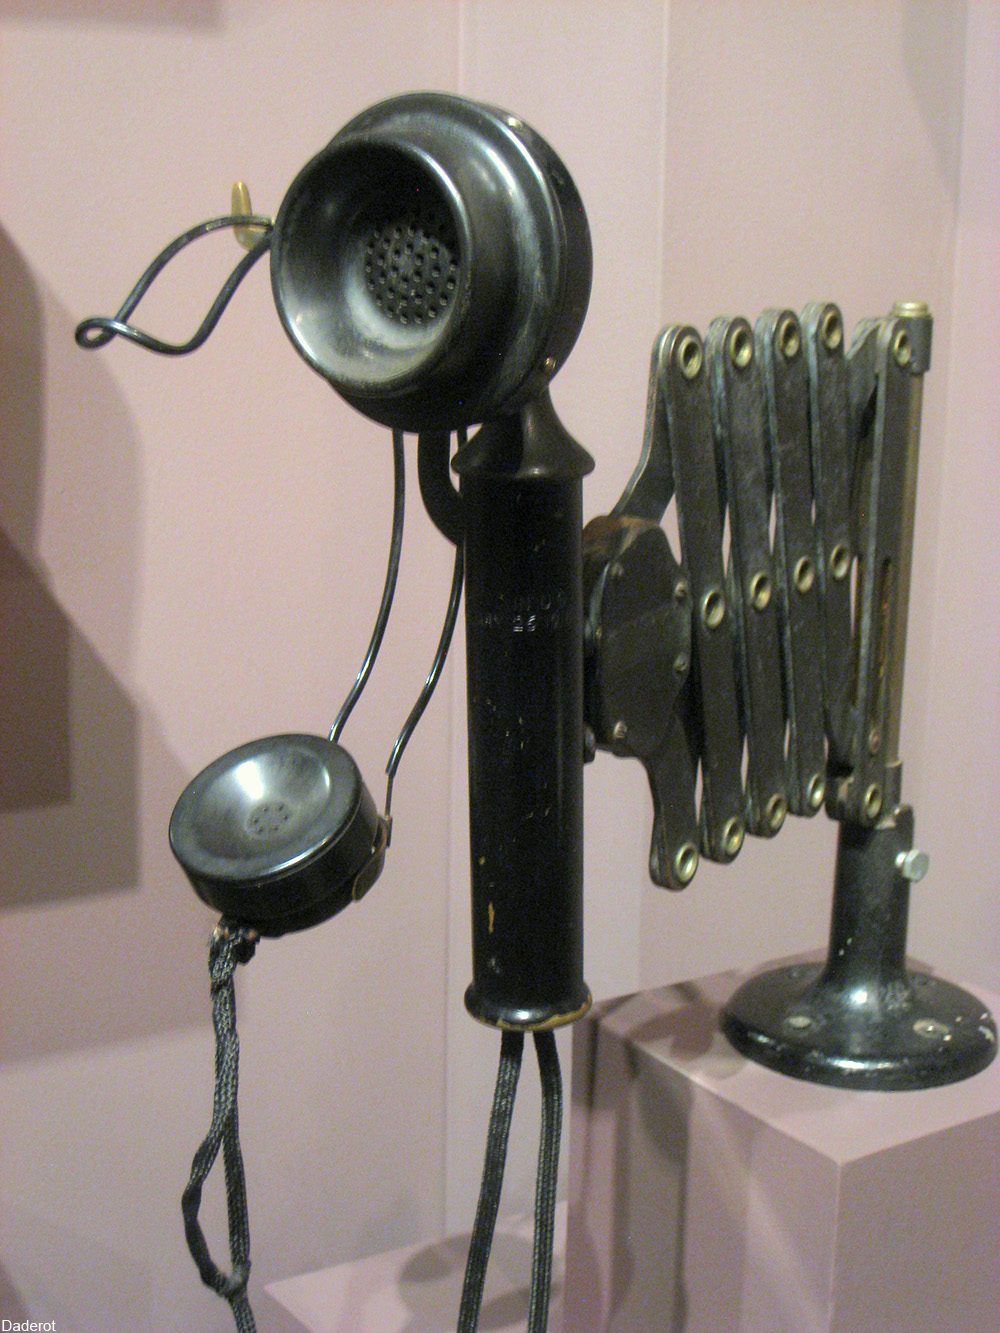 extendable candlestick style telephone